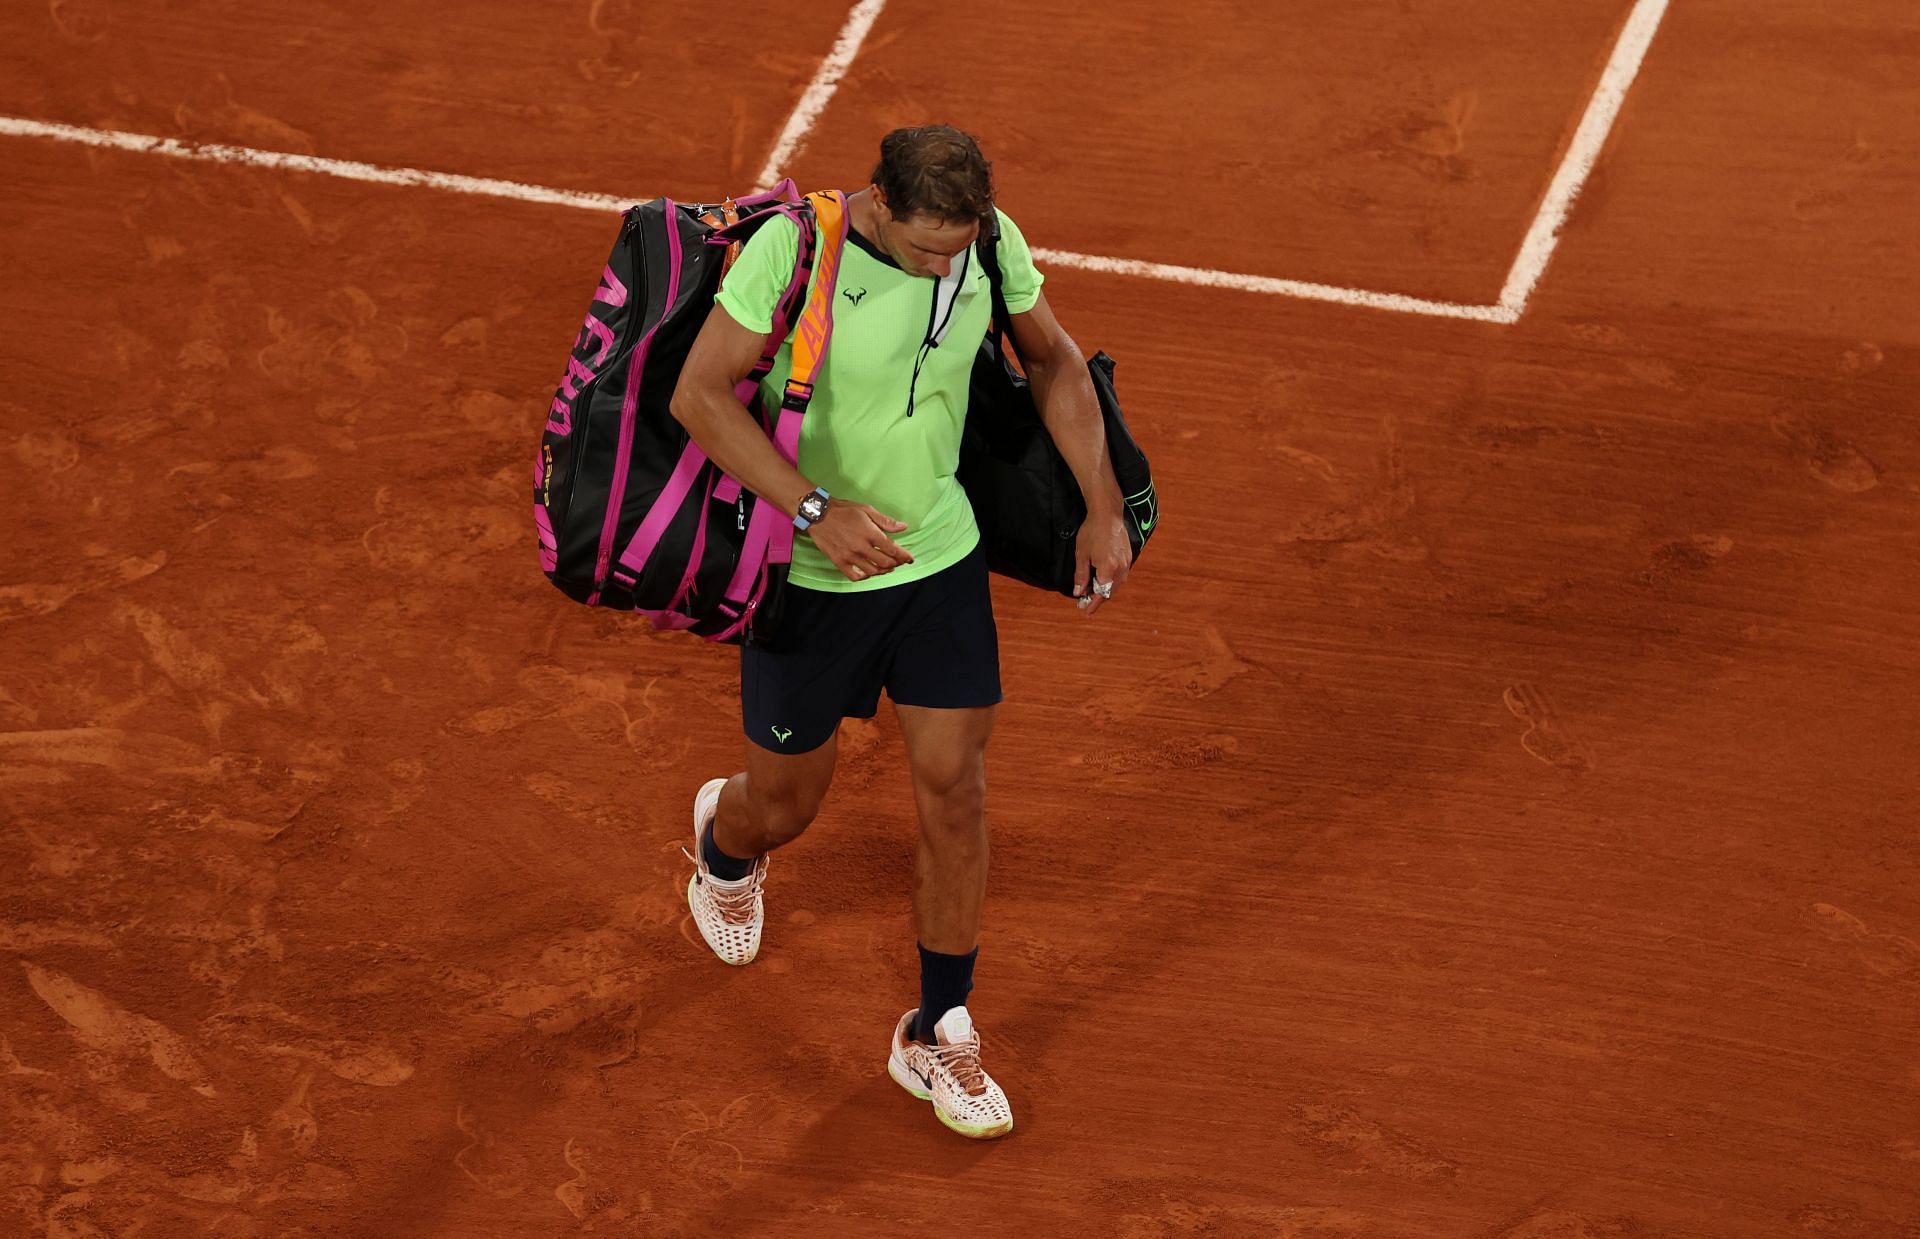 The Spaniard faced a semifinal exit at the 2021 French Open